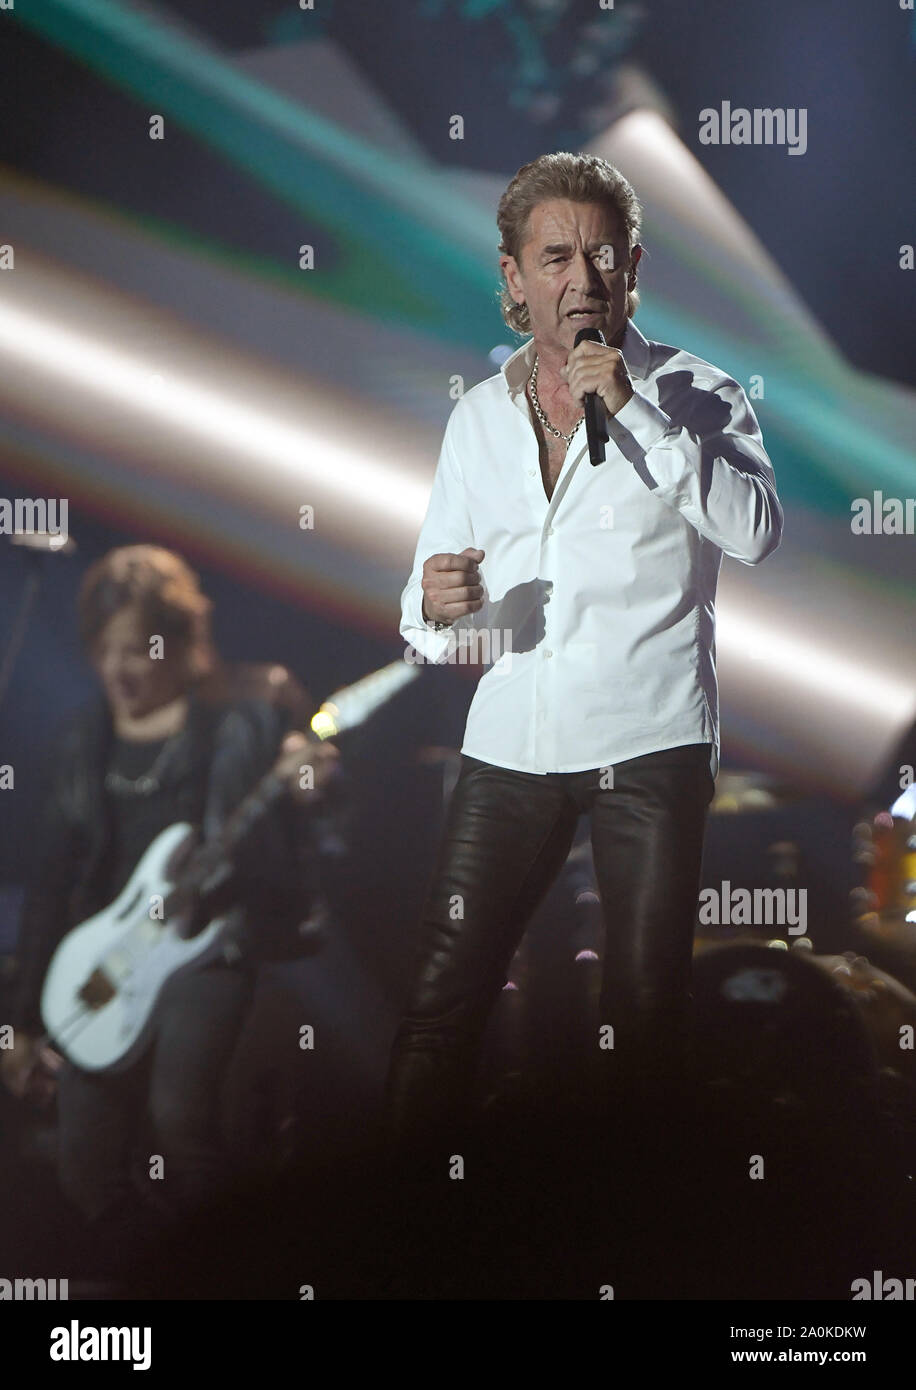 Leipzig, Germany. 20th Sep, 2019. Peter Maffay sings 'Golden Henne' during the TV gala. A total of 53 nominees from show business, society and sport can hope for the award. The Golden Hen is dedicated to the GDR entertainer Hahnemann, who died in 1991. Credit: Hendrik Schmidt/dpa-Zentralbild/dpa/Alamy Live News Stock Photo